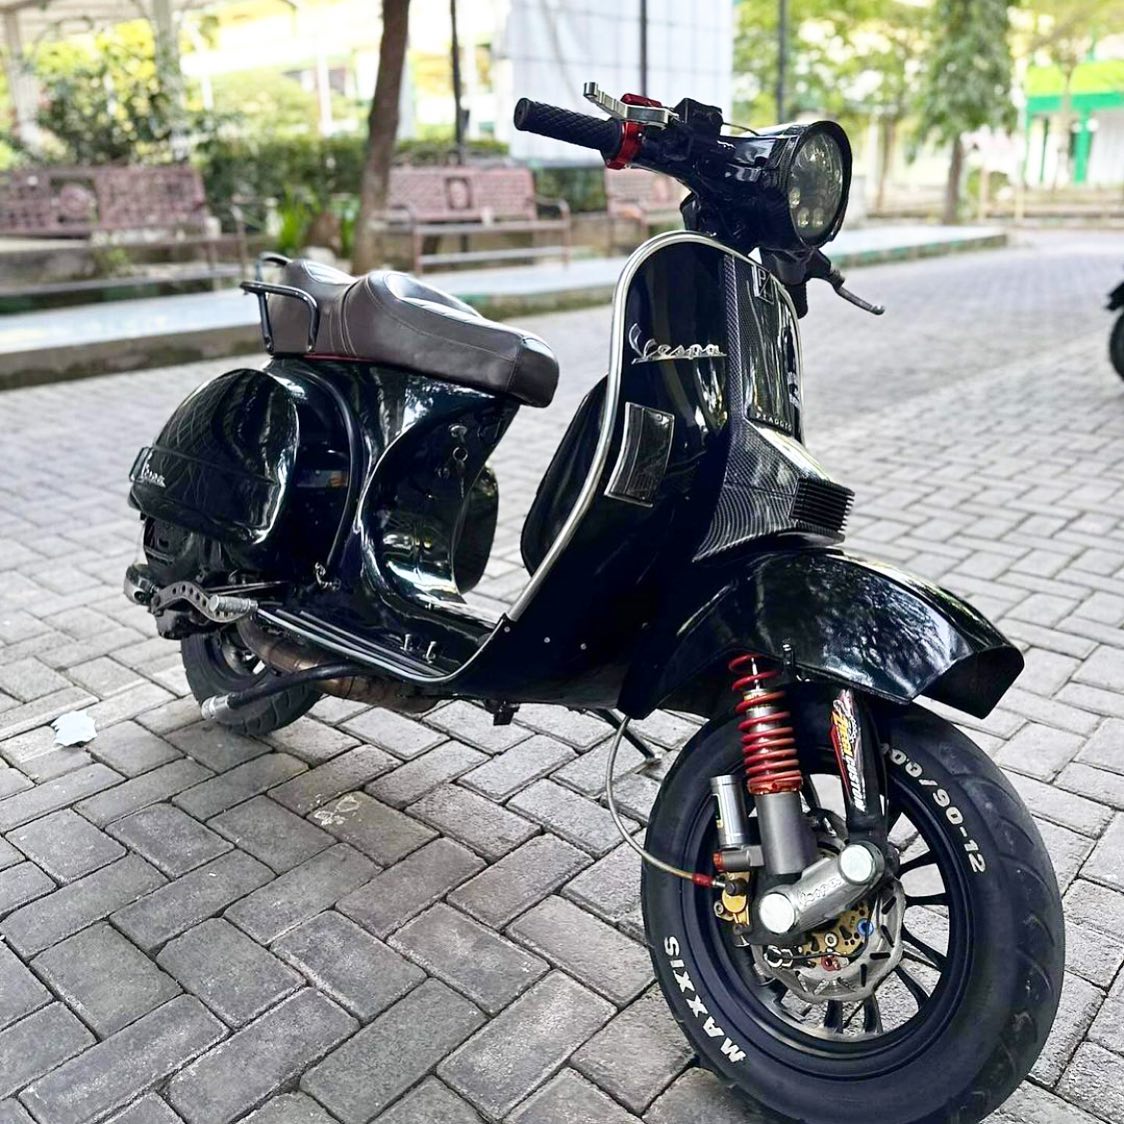 Black Vespa PX with black Vespa Sprint wheel always a beauty

Check toped @vesparkindo untuk genuine Vespa merchandise and accessories link in bio 

Feature @donvesp.id